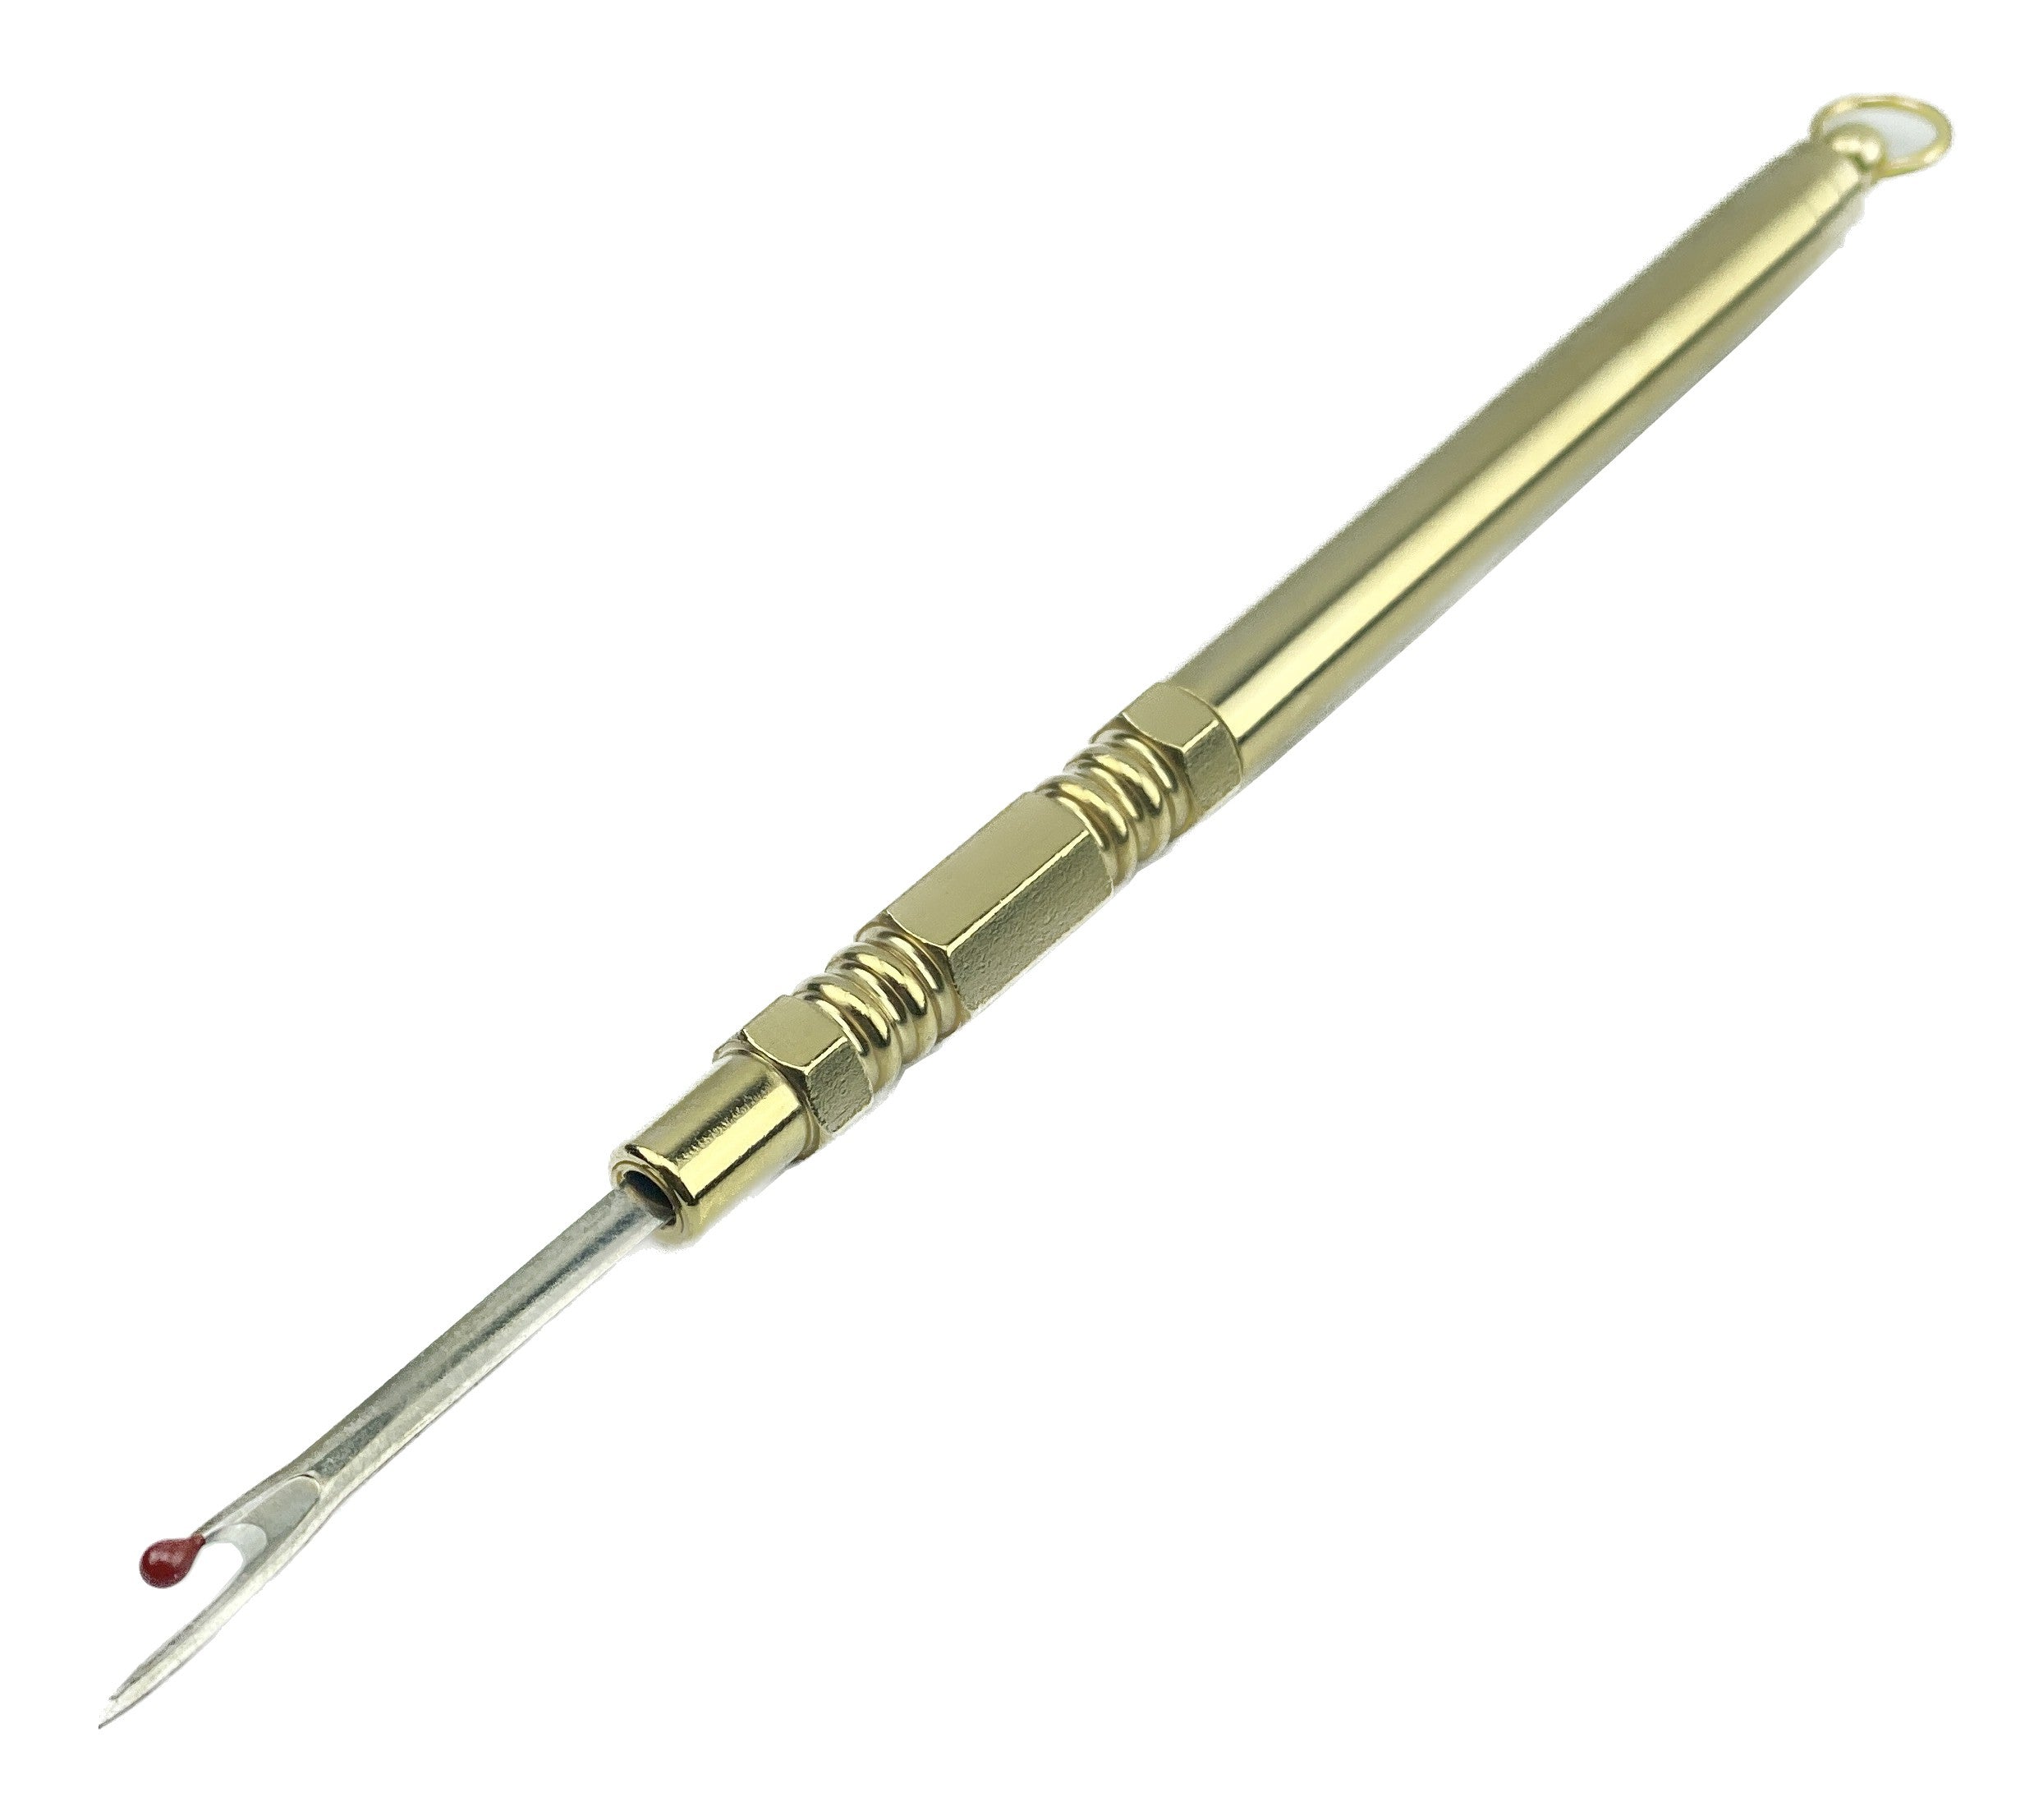 Brass Seam Ripper Sewing Tool by Quilt In A Day